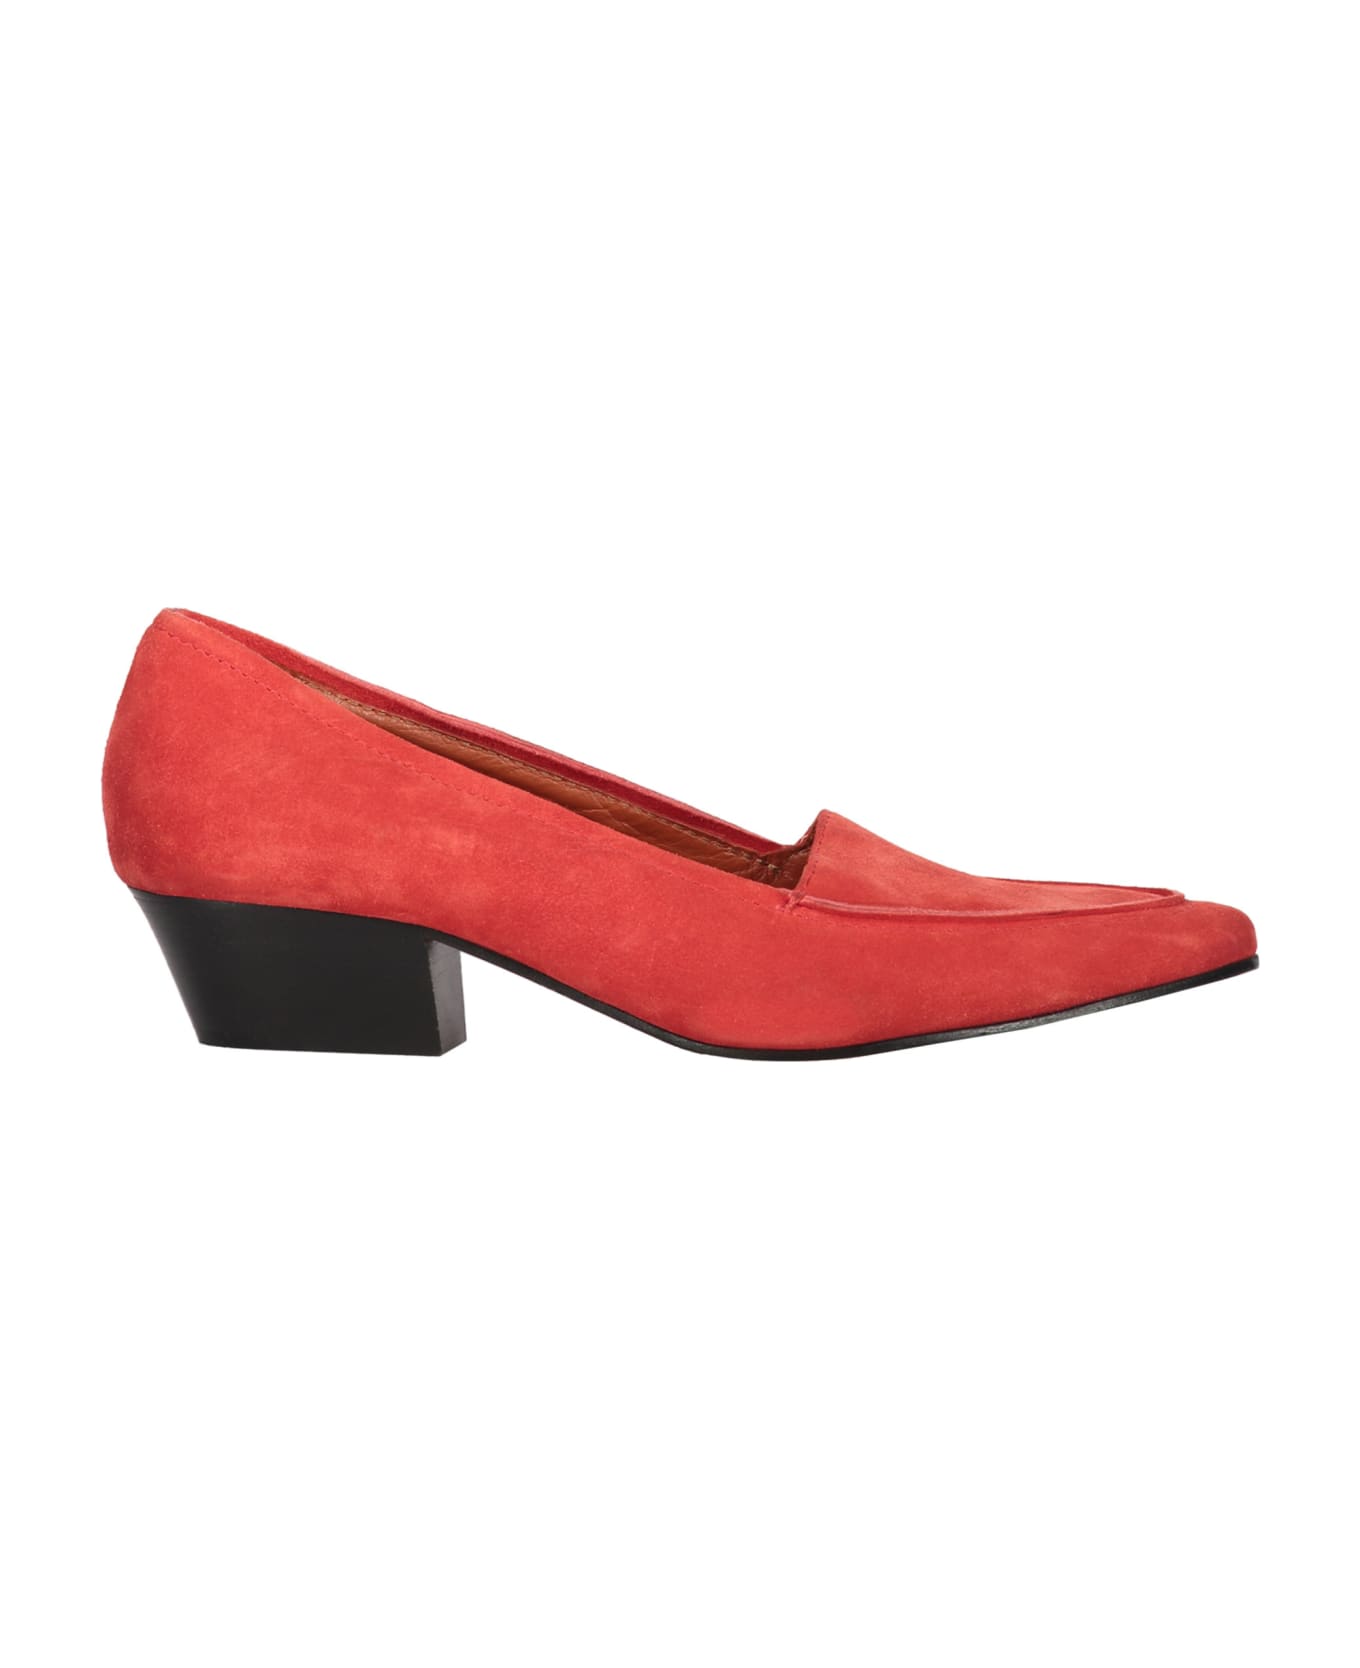 Missoni High Heel Leather Loafers - Coral ハイヒール